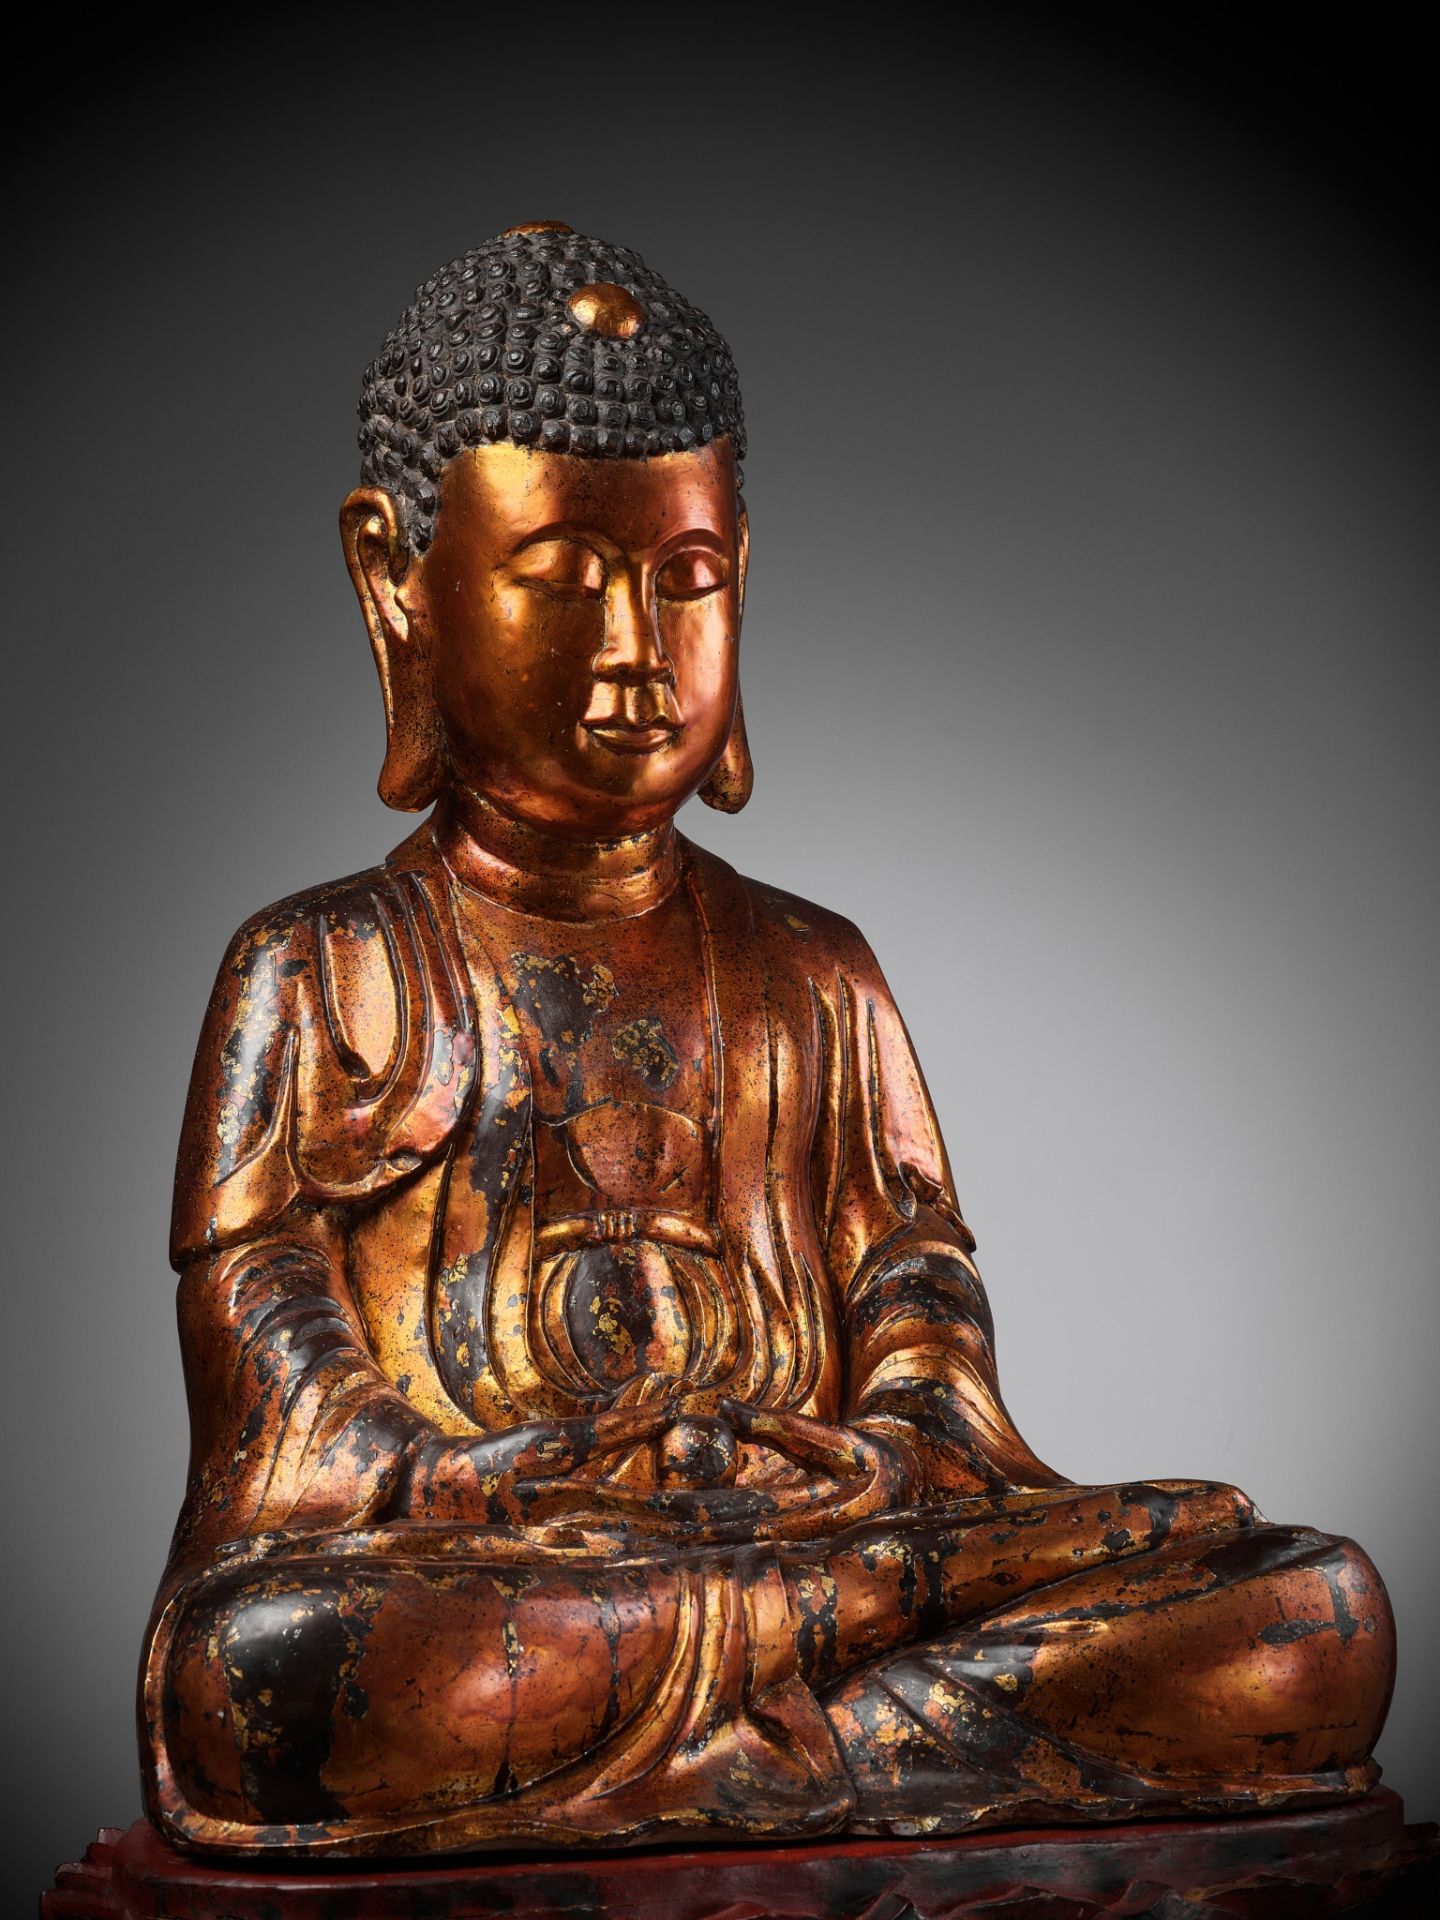 AN EXTRAORDINARY LARGE GILT-LACQUER WOOD STATUE OF BUDDHA, VIETNAM, 17TH-18TH CENTURY - Image 7 of 11